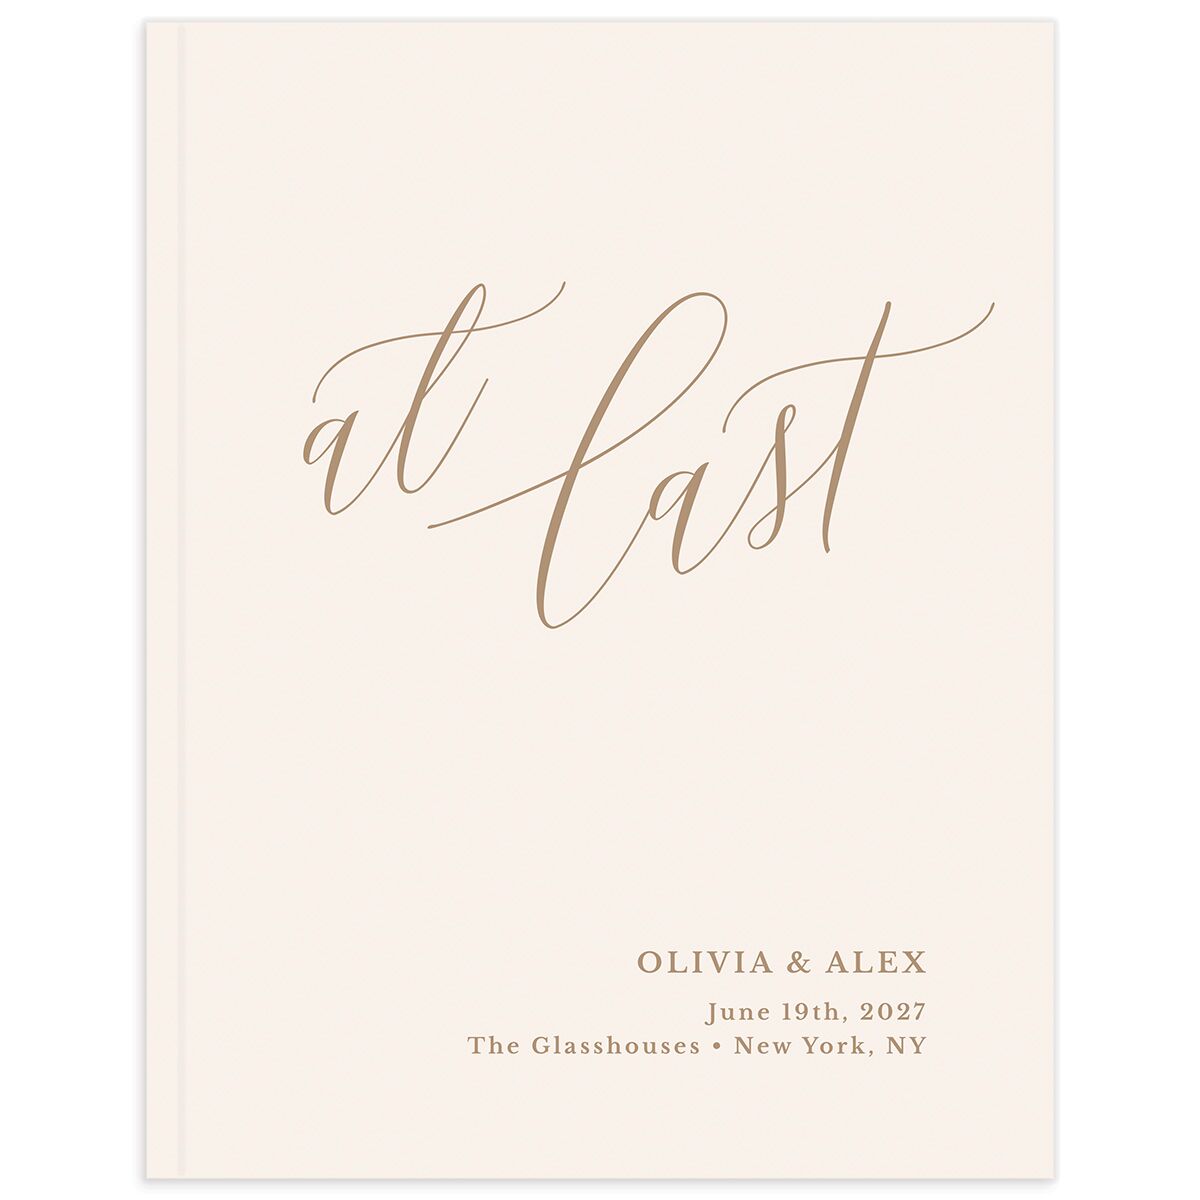 At Last Wedding Guest Book